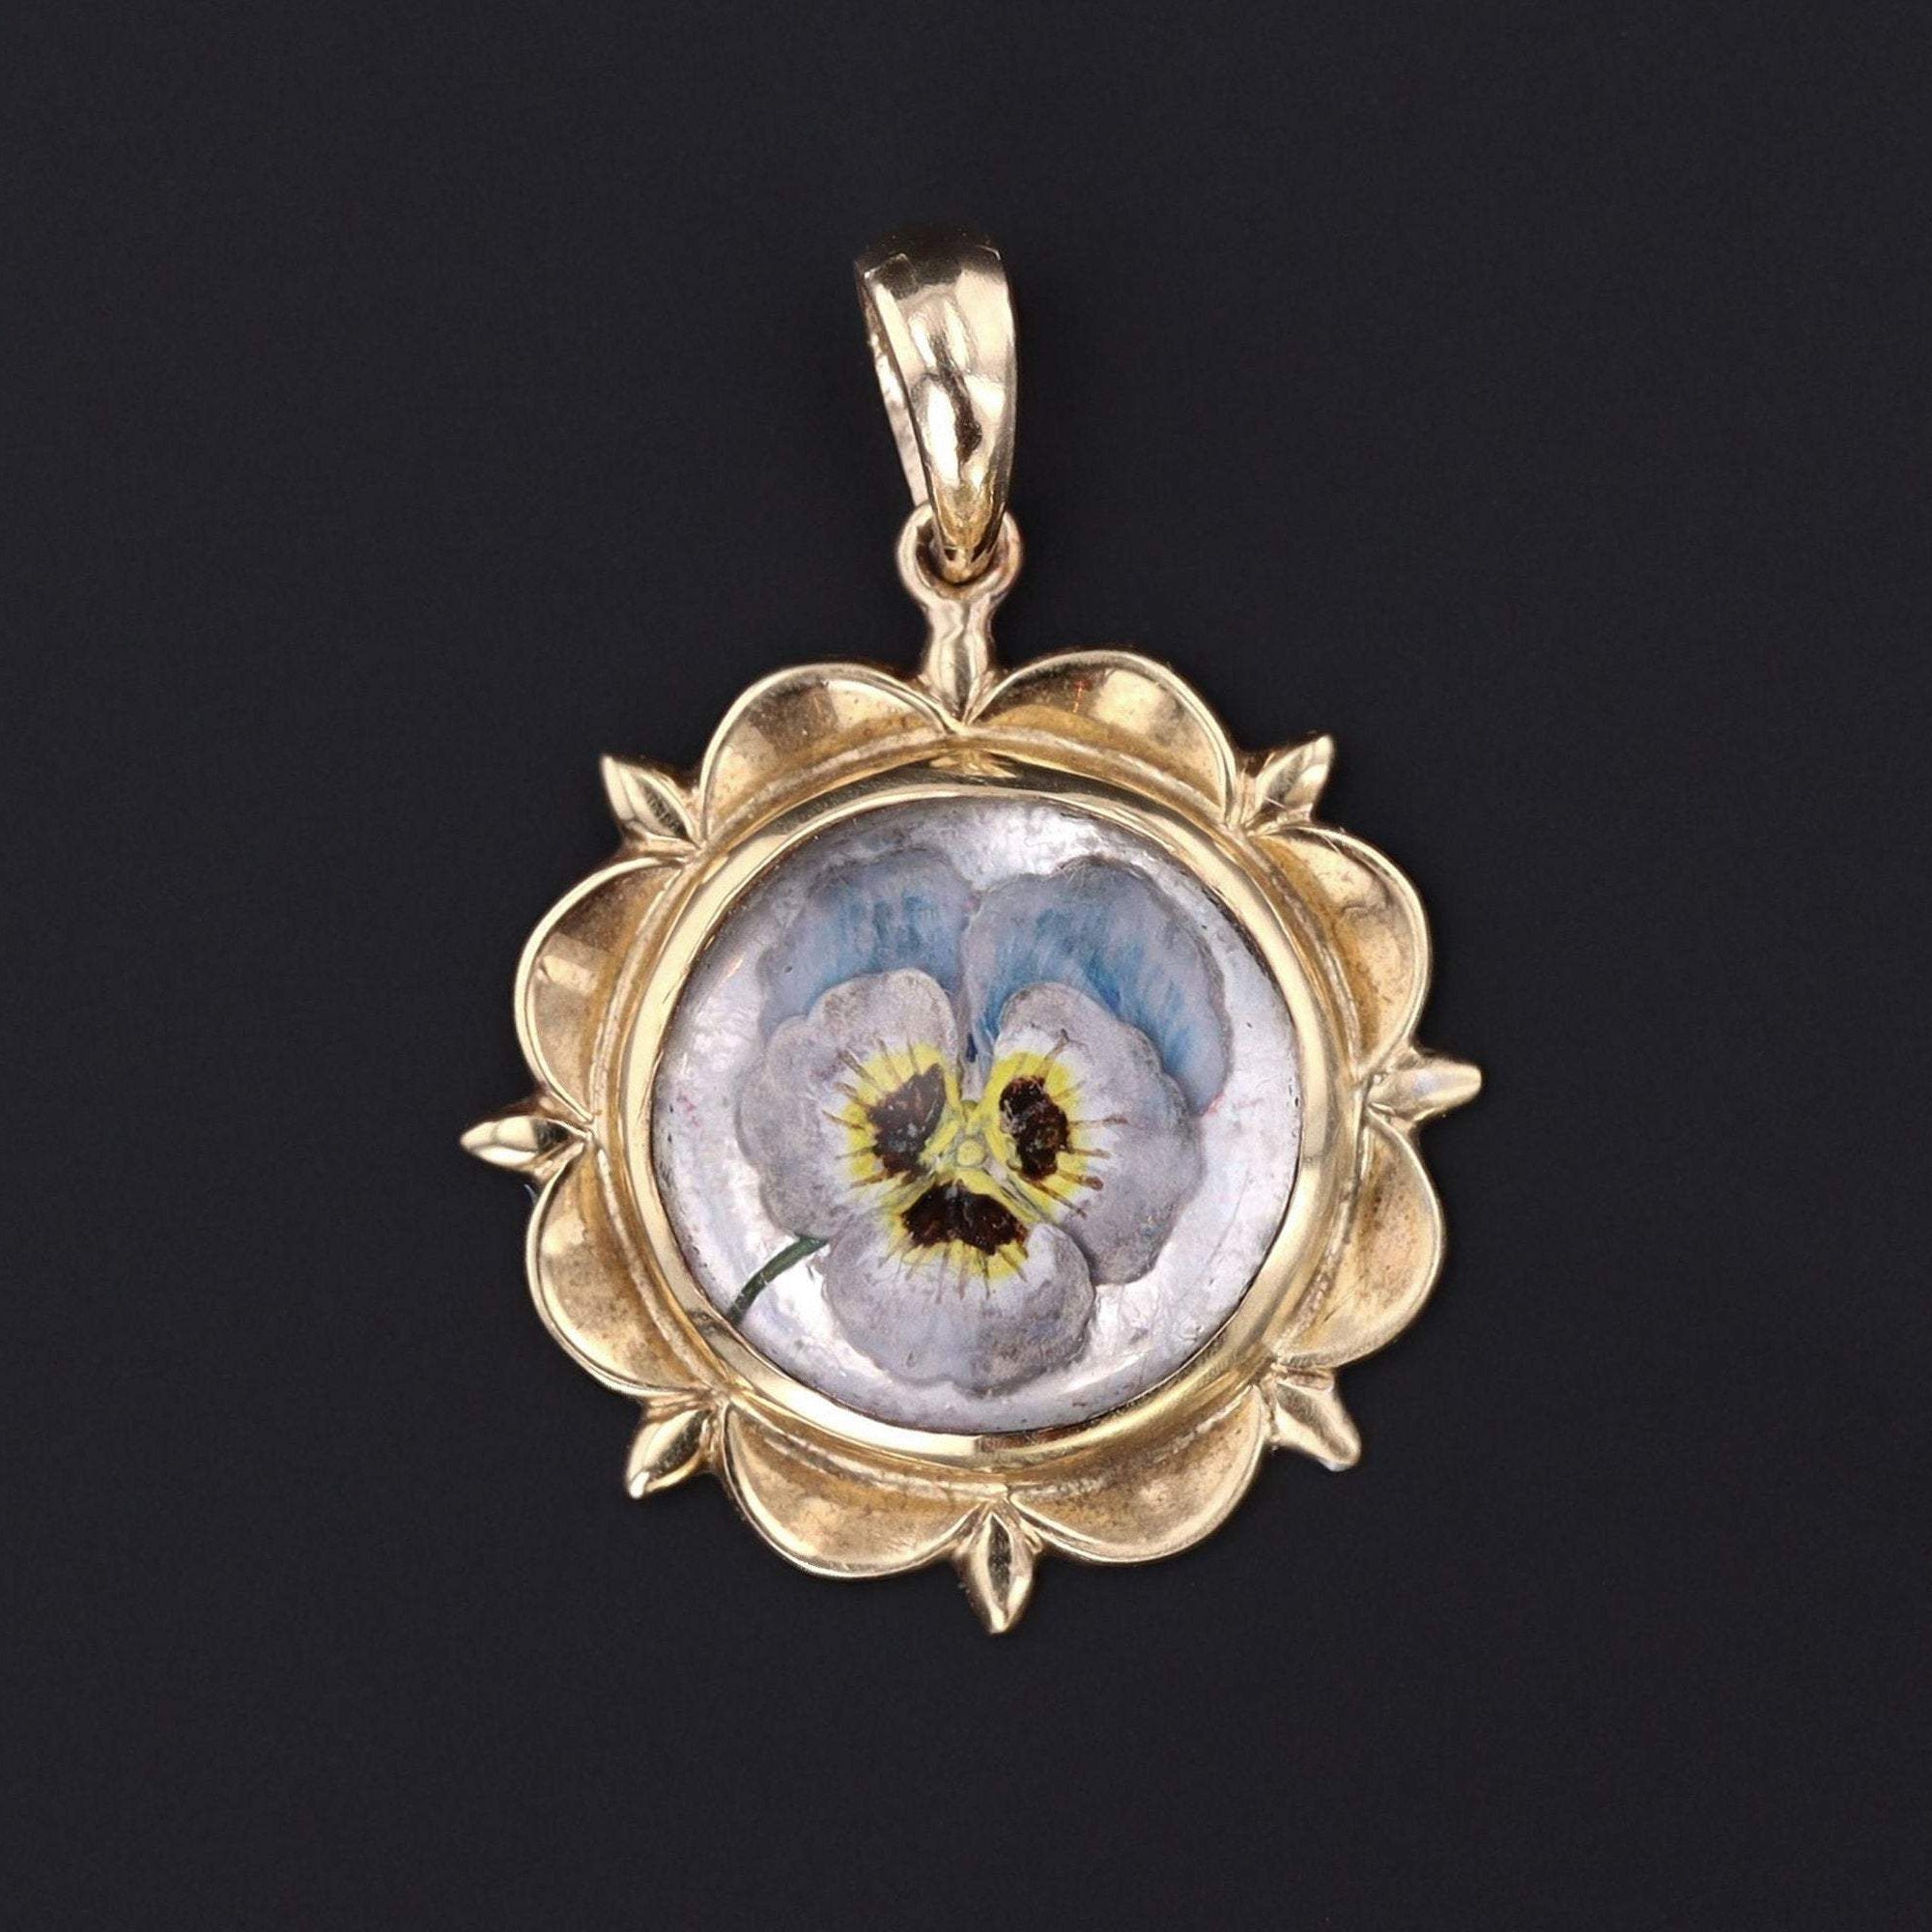 Antique Pansy Charm | Antique Reverse Painted Crystal Pansy Charm | 14k Gold Flower Charm | Brooch Conversion